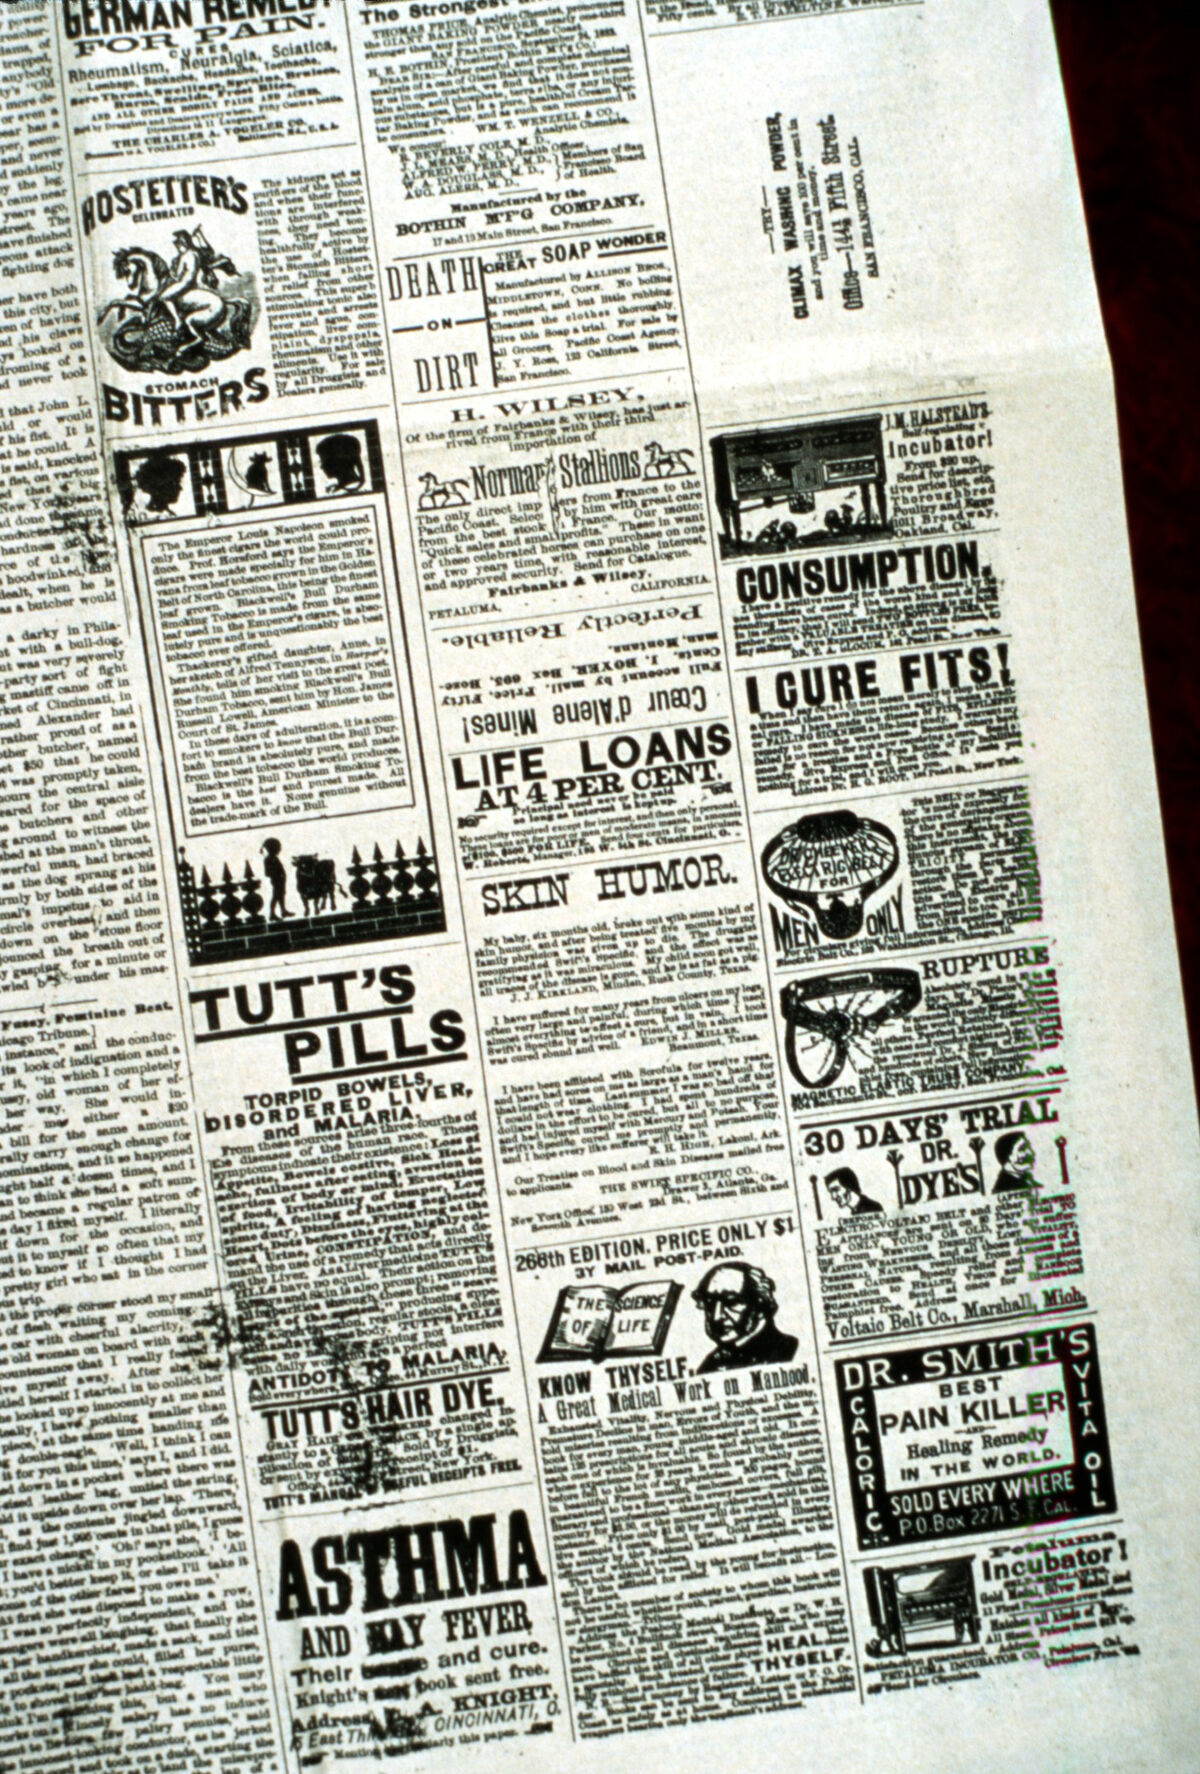 Patent sheets were bought by newspaper publishers with one blank side for local news and one side covered in advertisements, often for patent medicines.